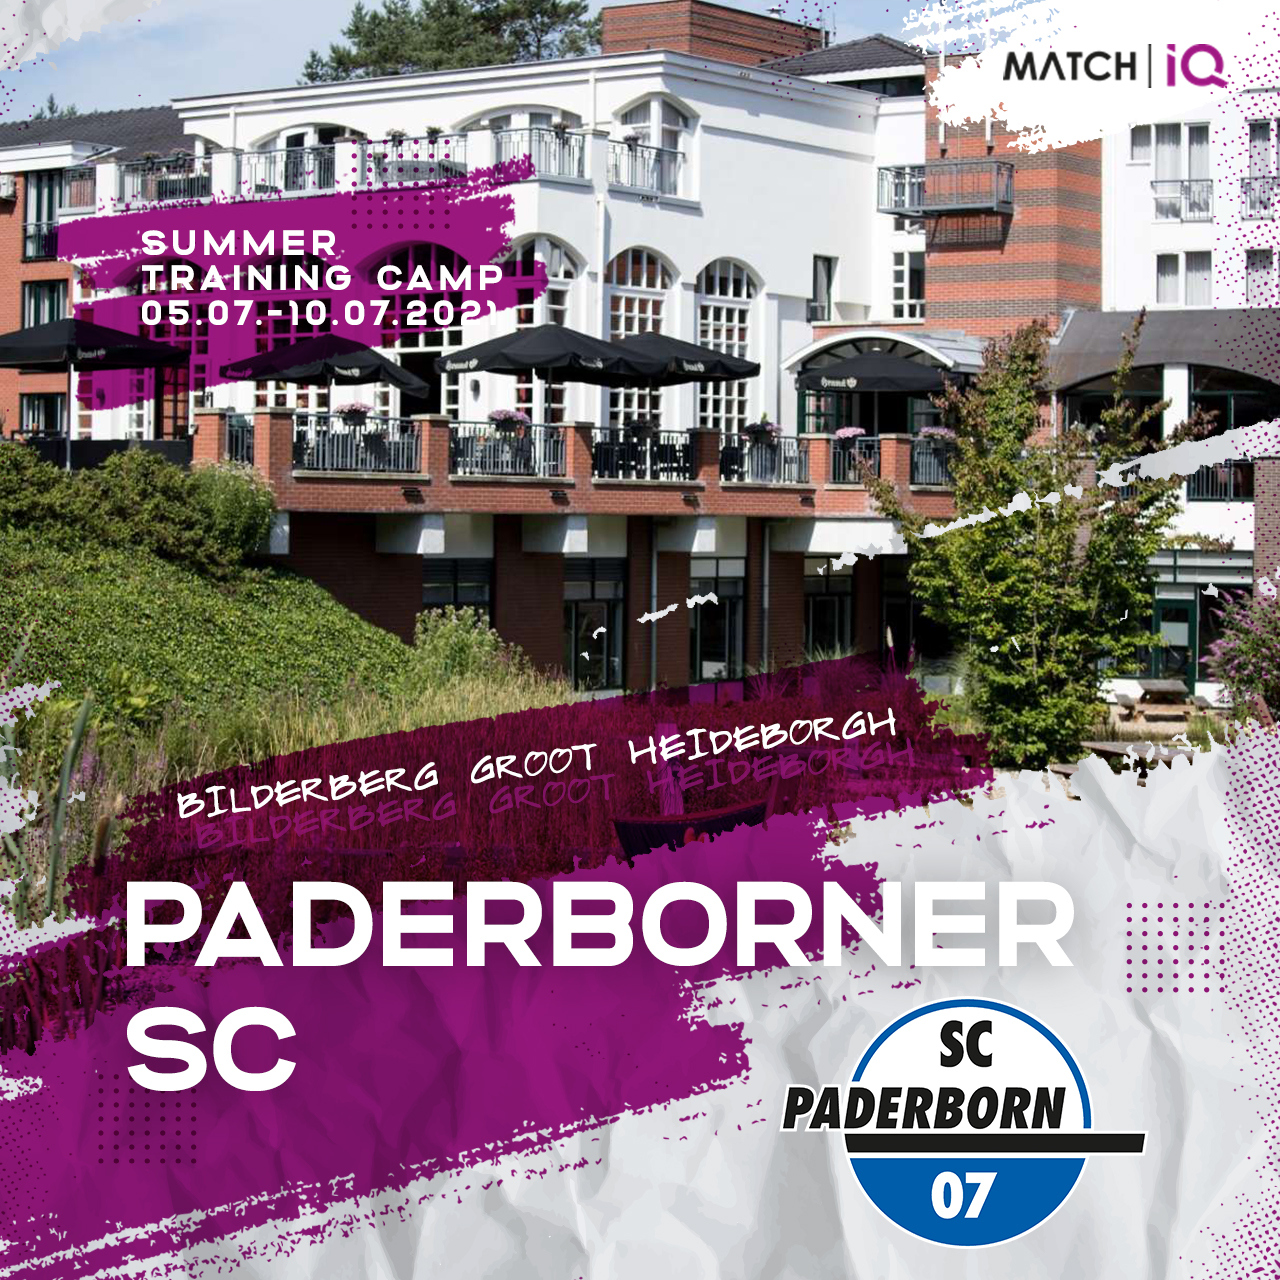 Match IQ brings SC Paderborn to the Netherlands